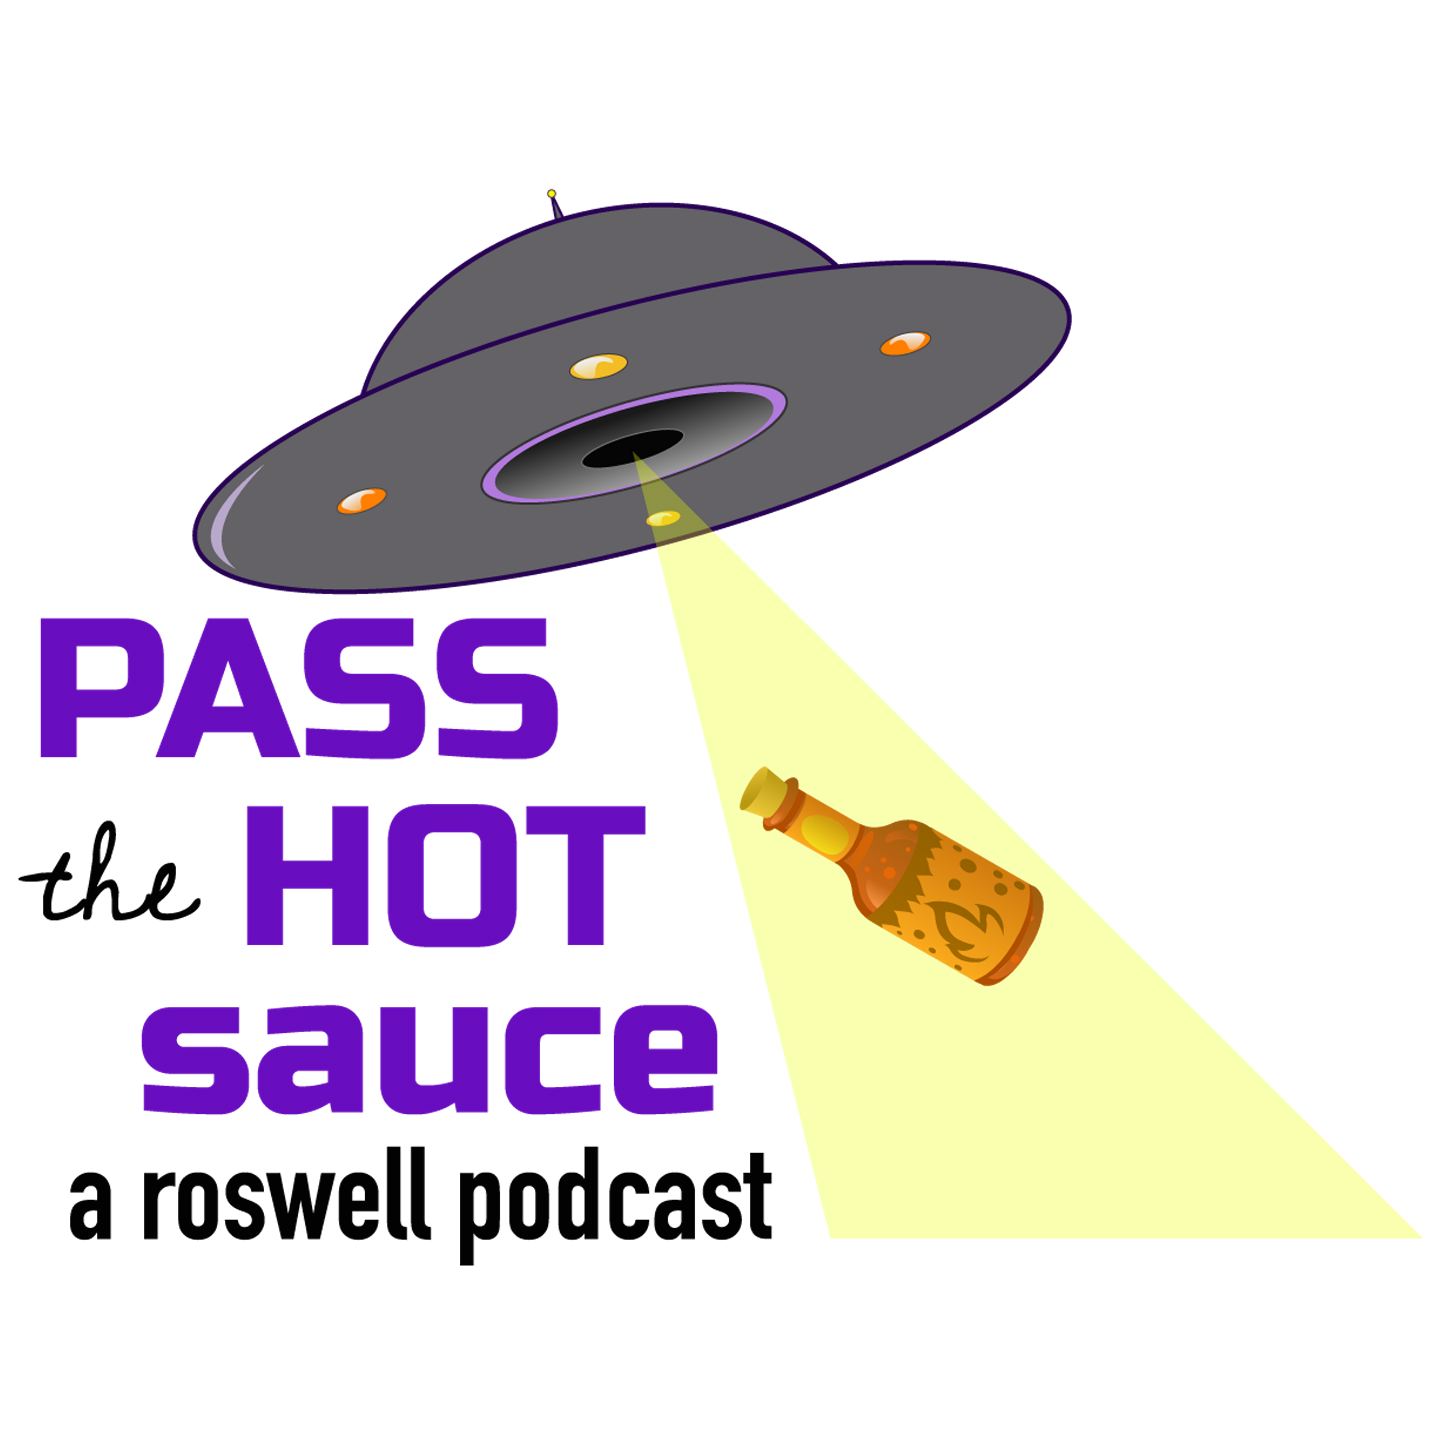 Pass the Hot Sauce: A Roswell Podcast